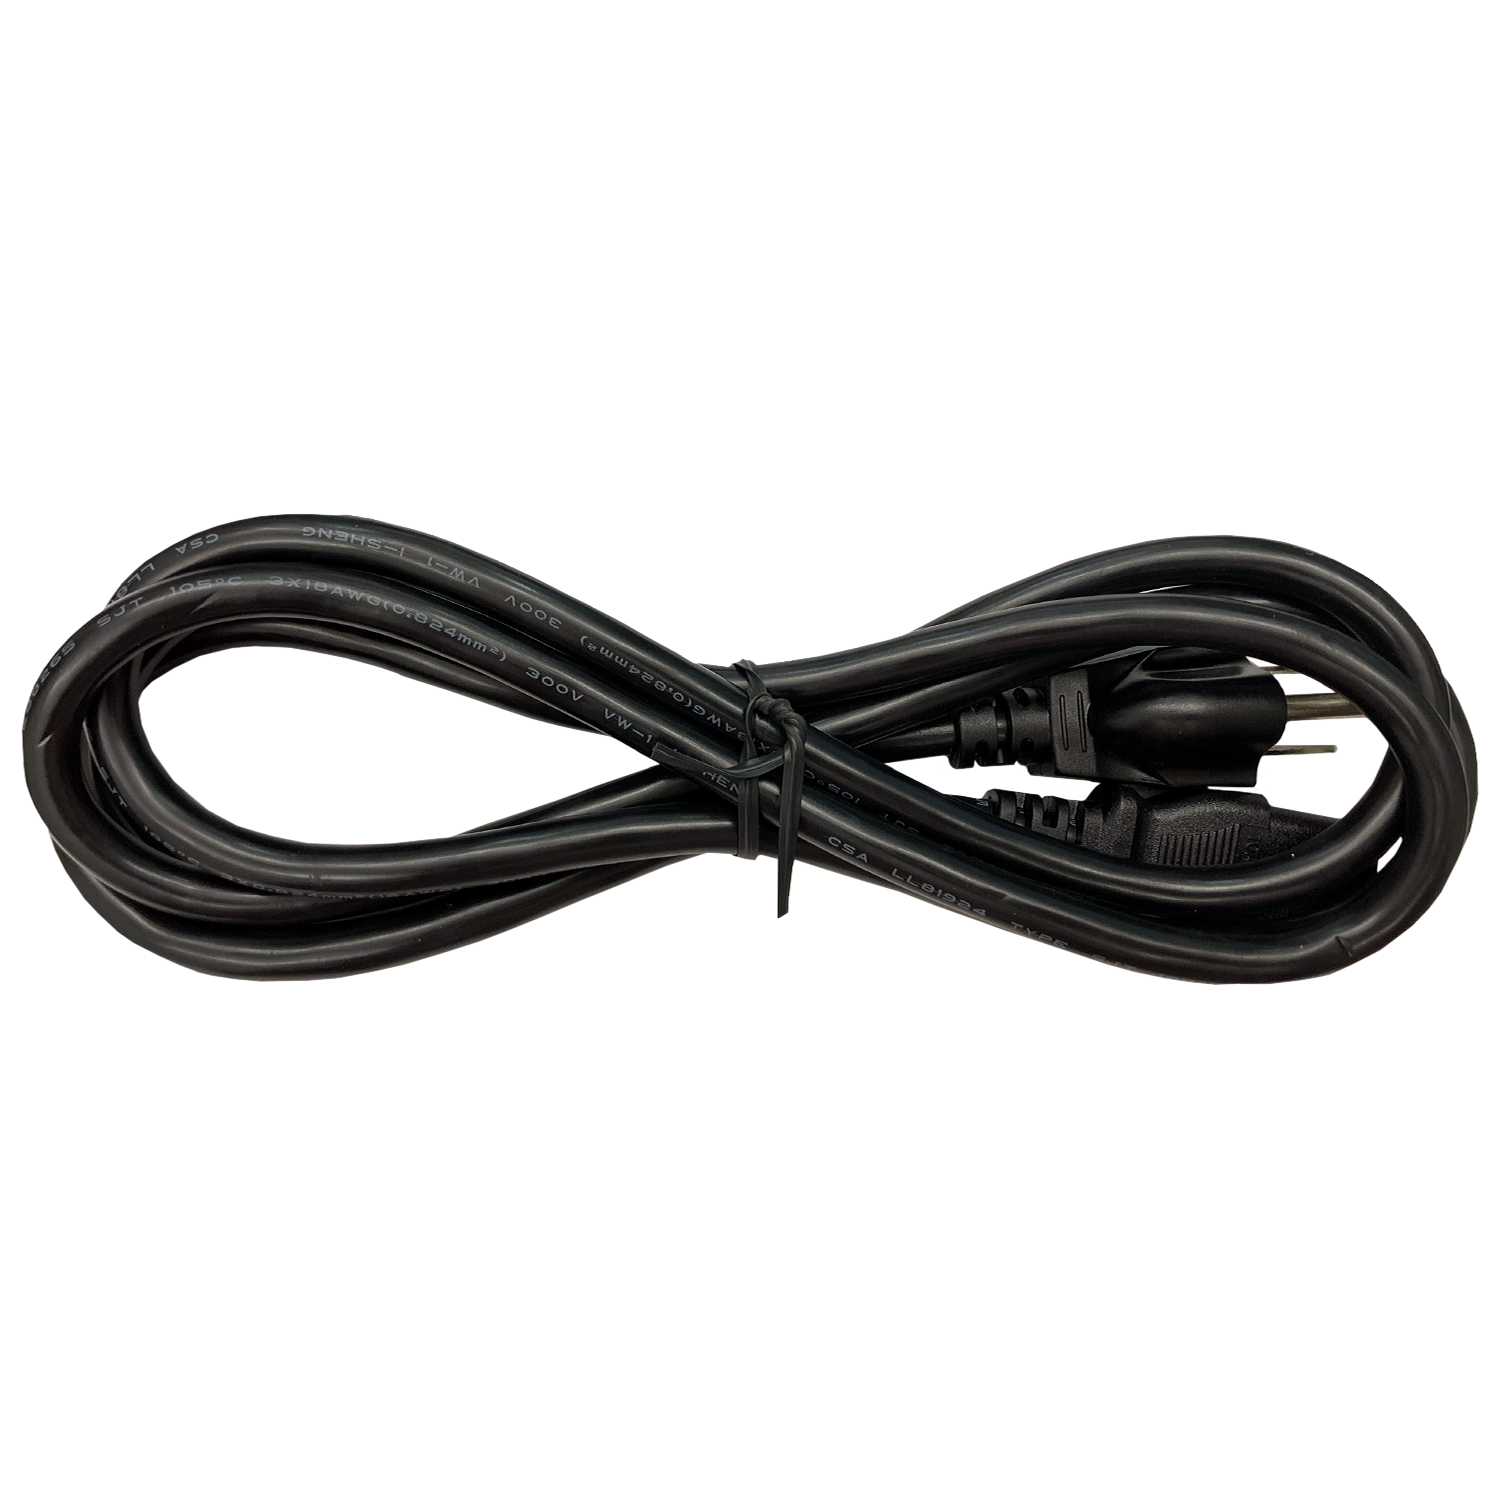 This Power Cable can provide your main power supply and is compatible with all Pennsylvania Skill machines.  Length: 6’. Sold by Miele Manufacturing.